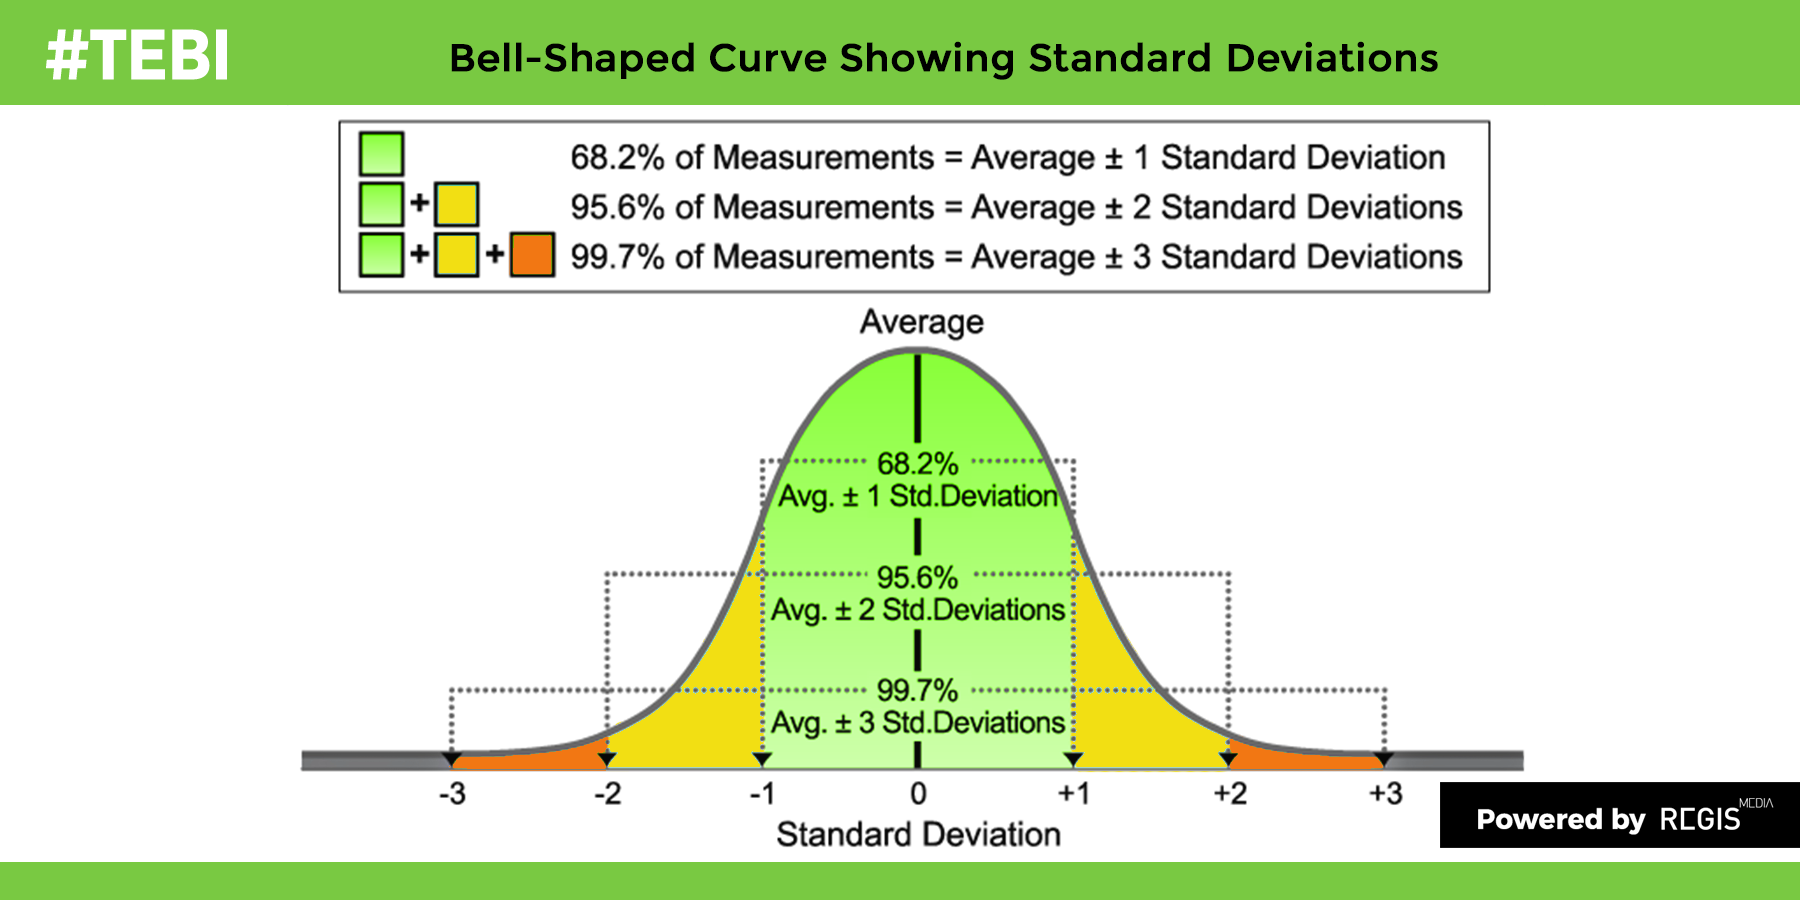 Easy Cling Graph Bell Curve